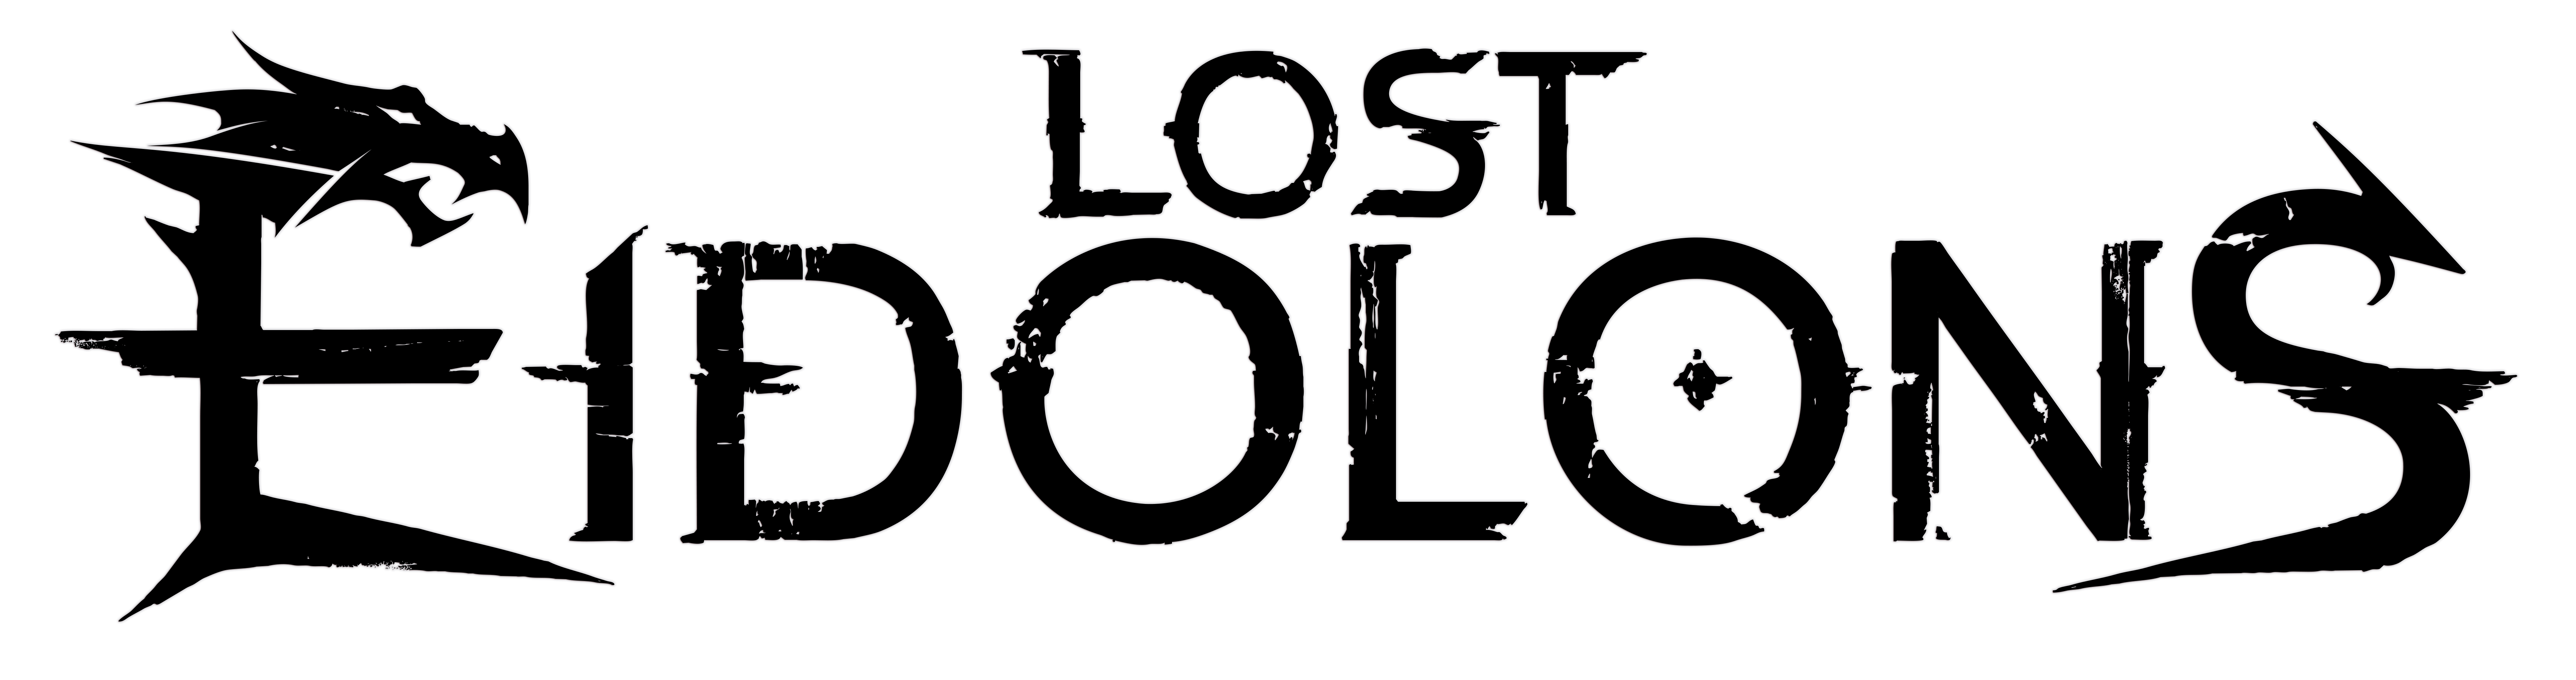 Lost Eidolons for apple instal free